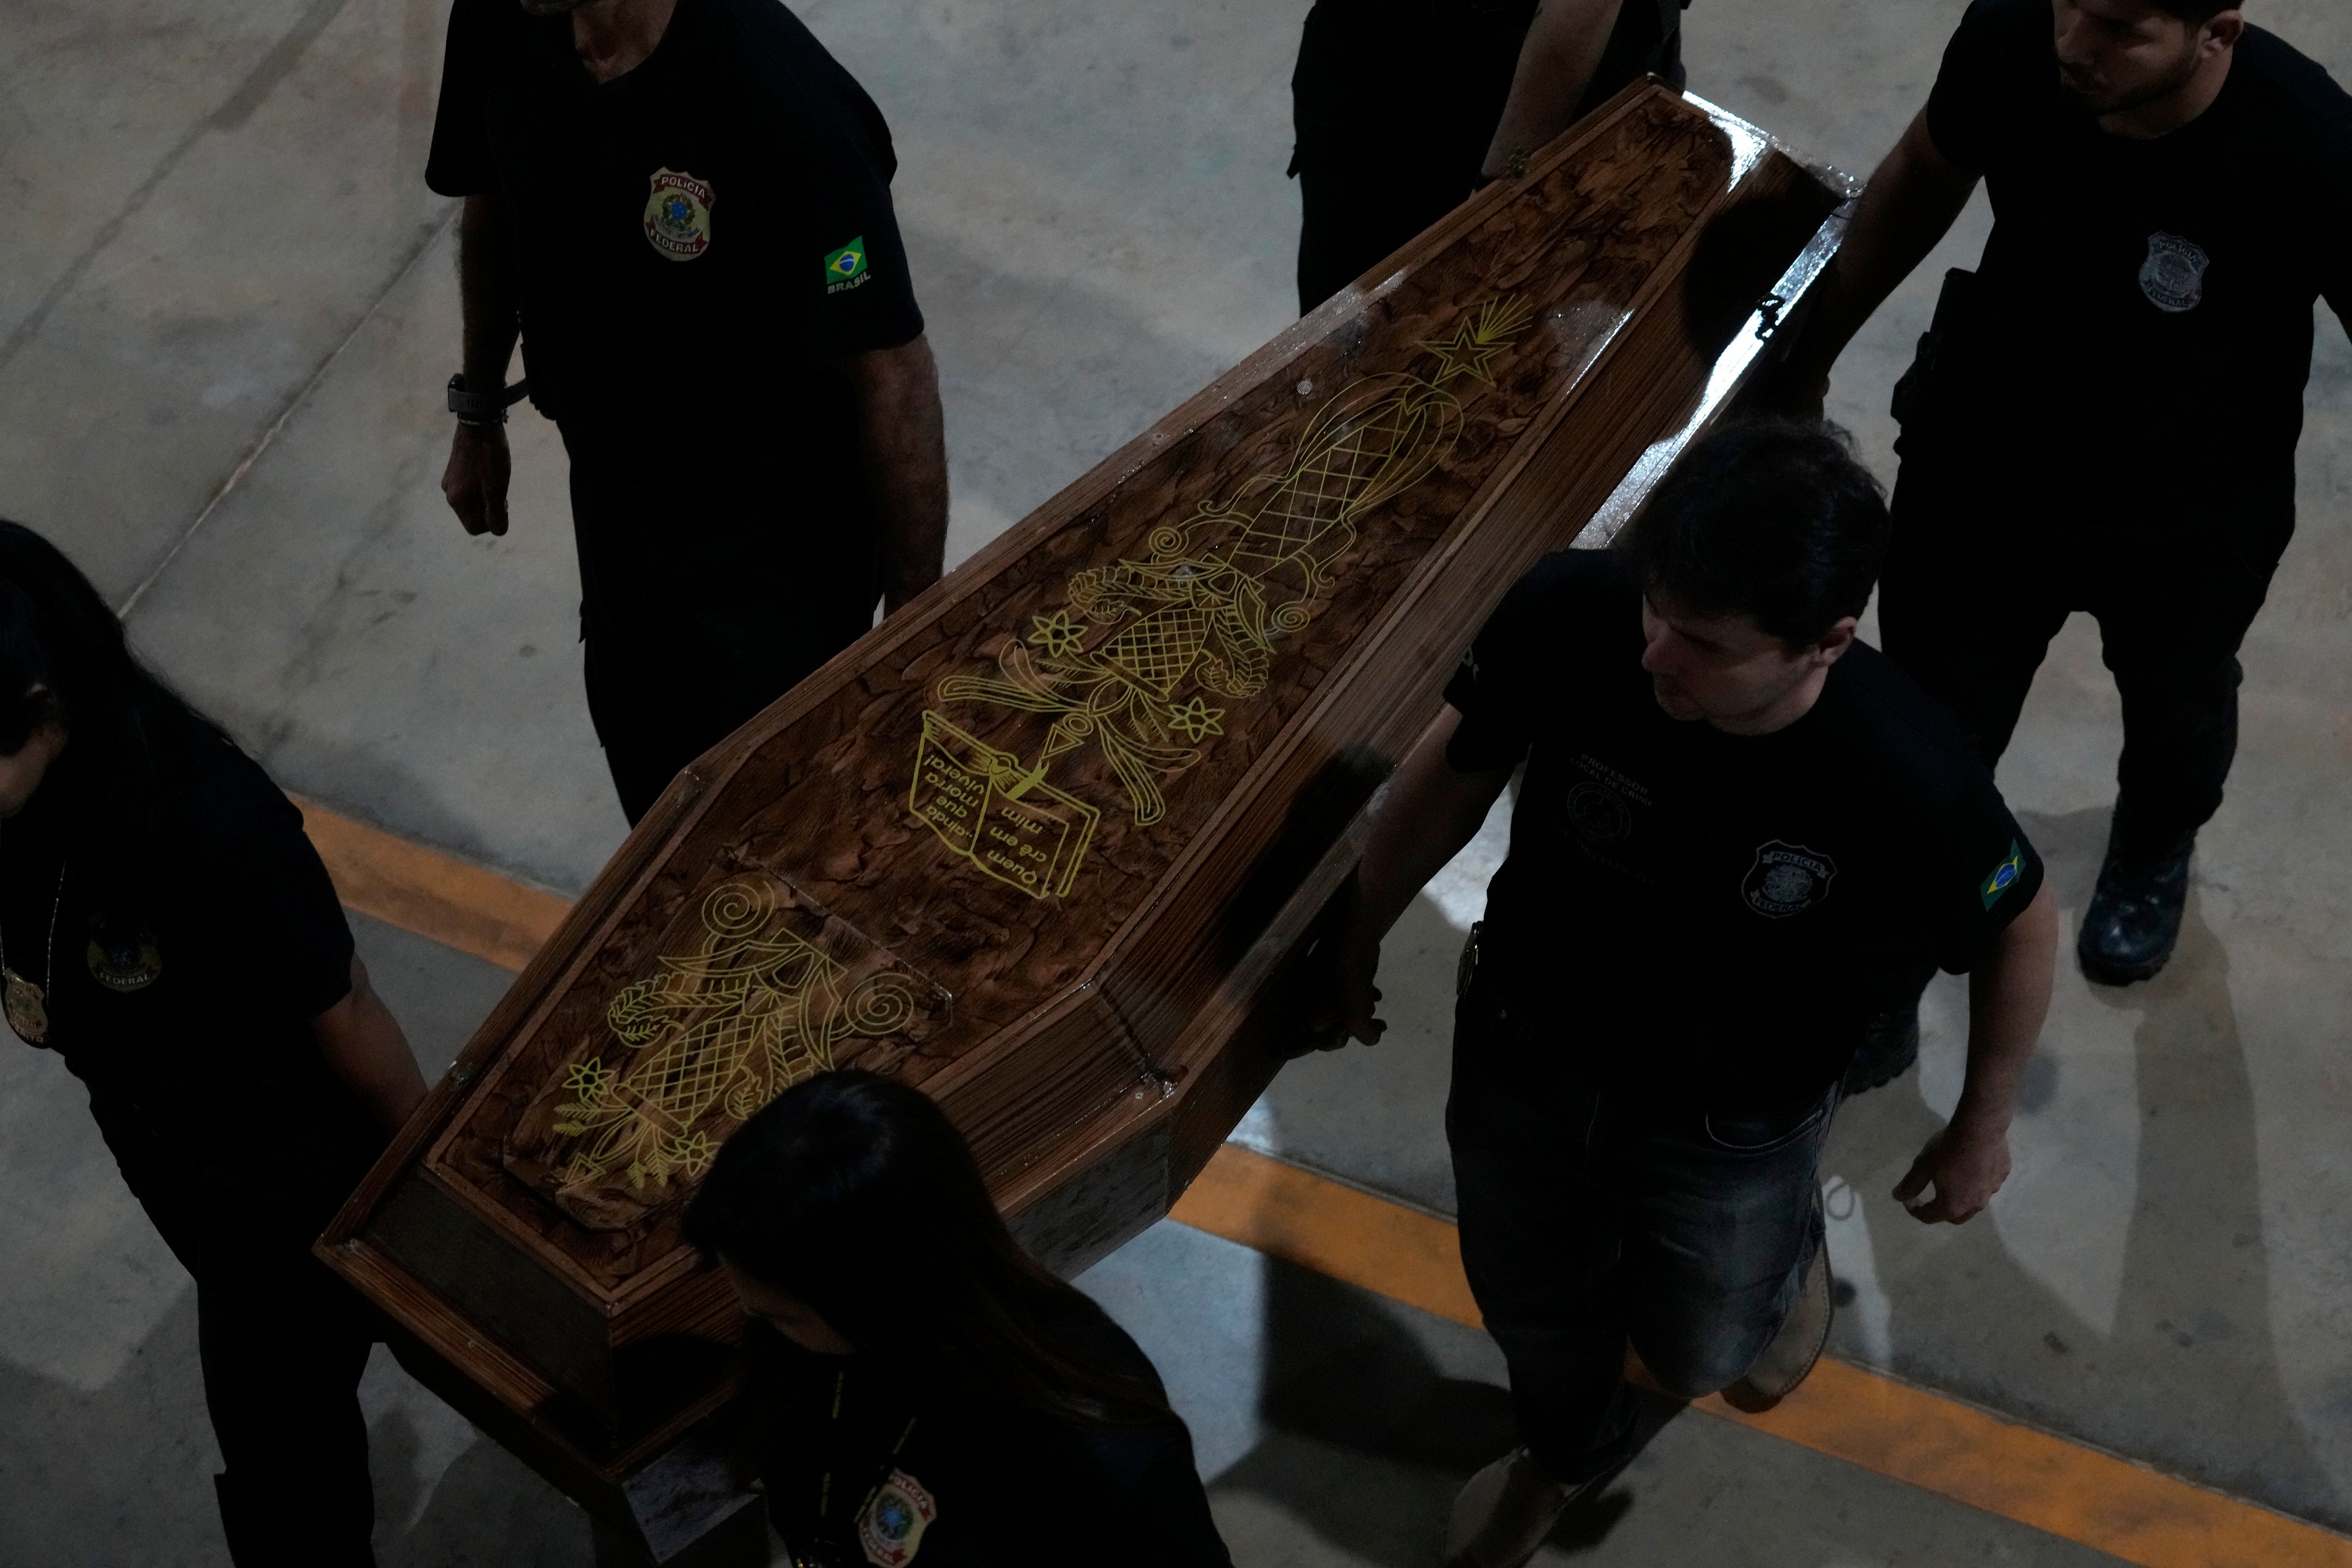 Federal police officers carry remains believed to be of Dom Phillips and Bruno Pereira